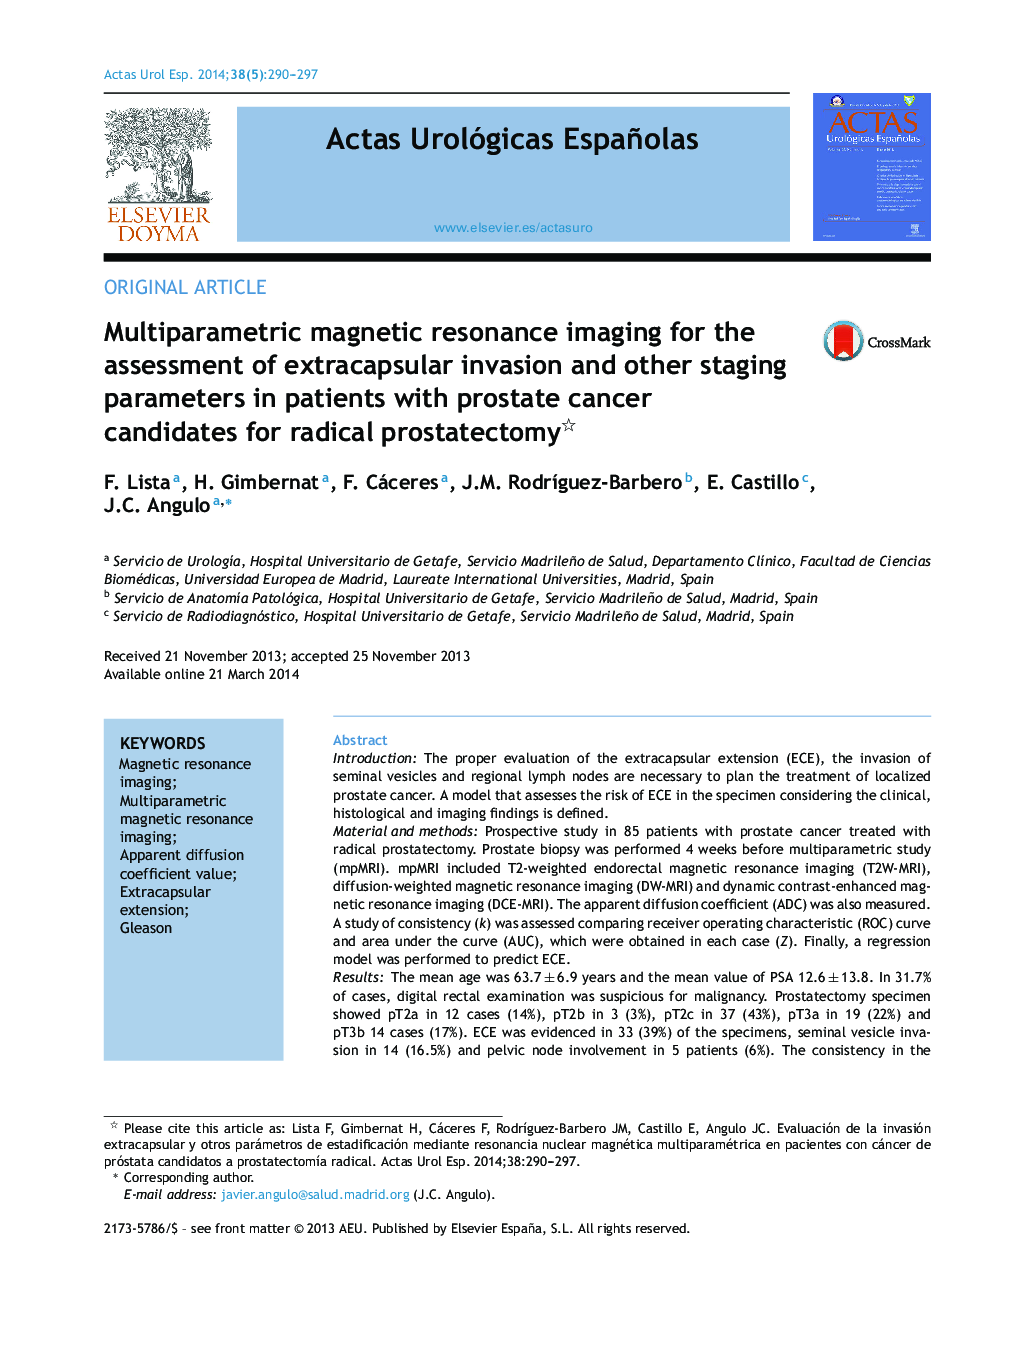 Multiparametric magnetic resonance imaging for the assessment of extracapsular invasion and other staging parameters in patients with prostate cancer candidates for radical prostatectomy 